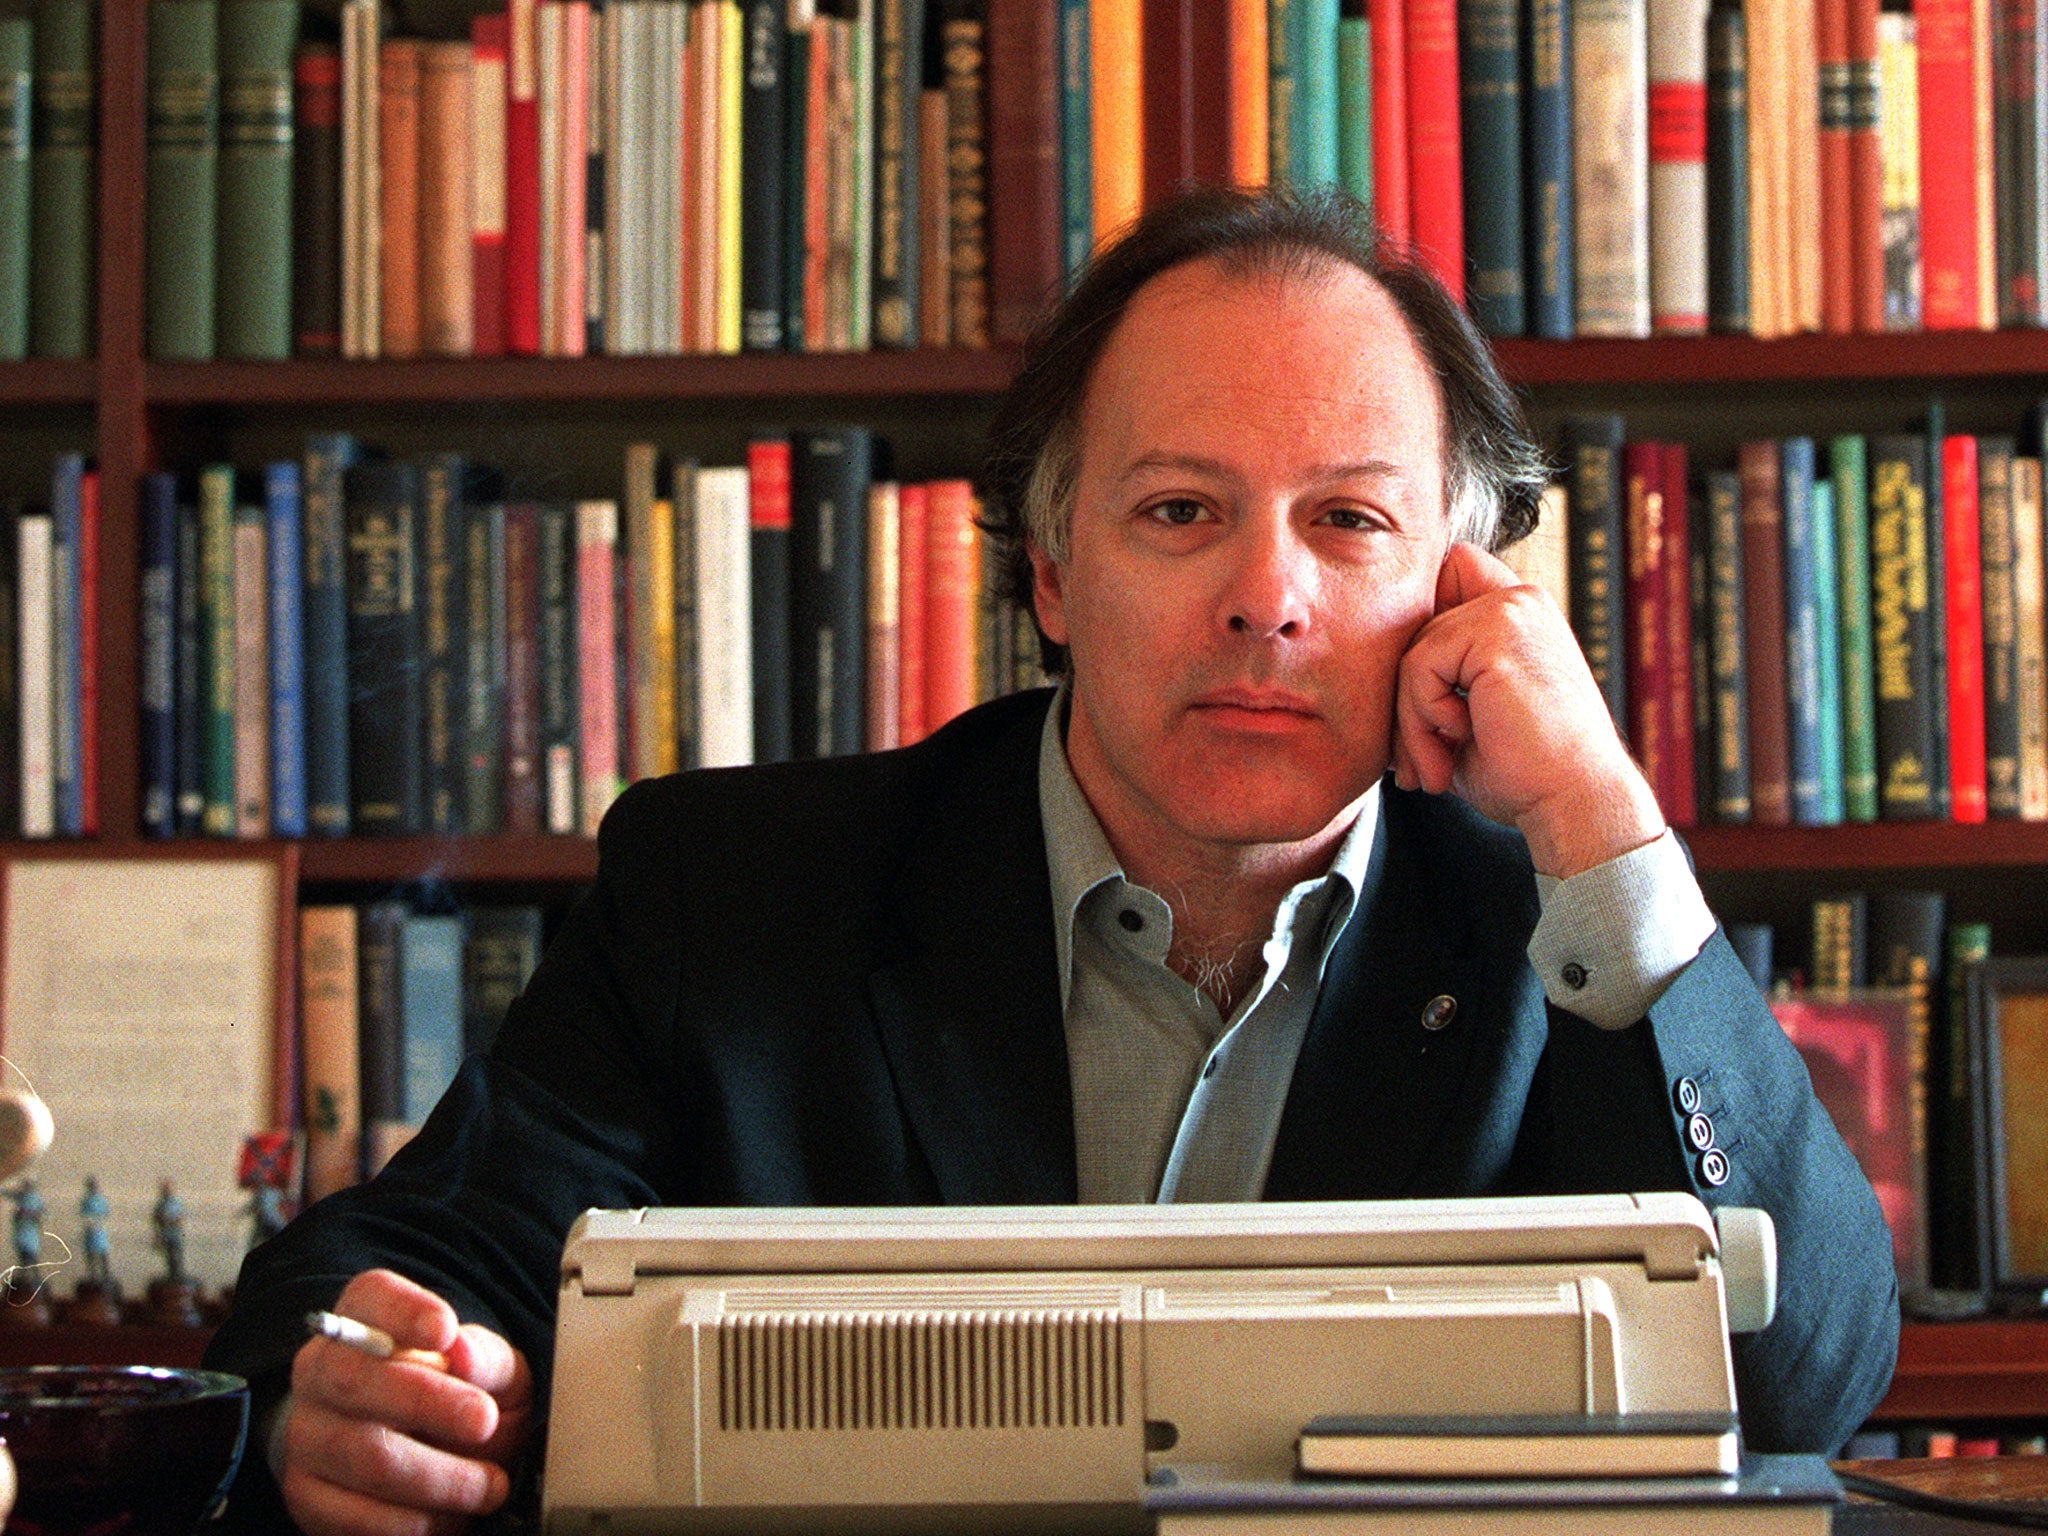 Javier Marías's novels are both accessible and literary